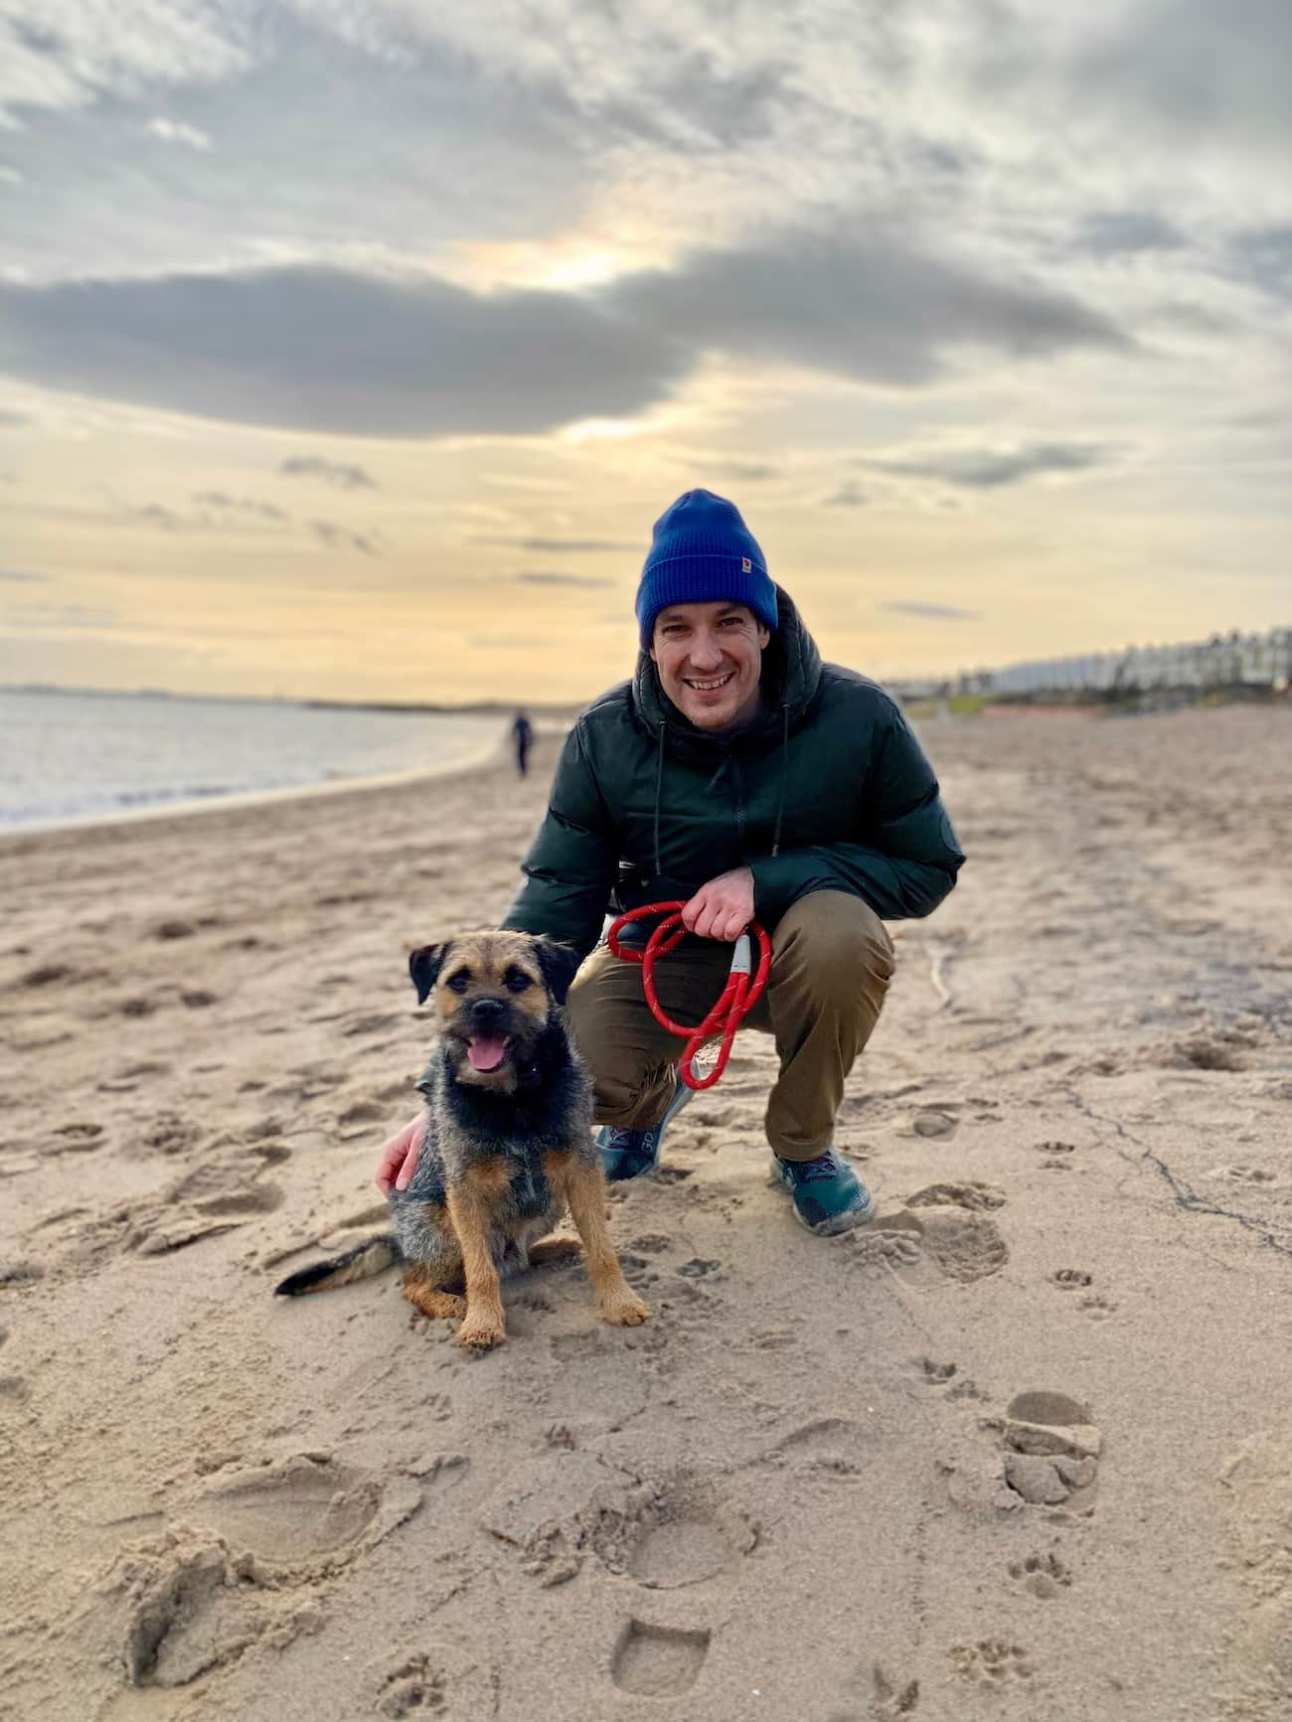 A smiling man wearing a green jacket and blue beanie hat crouches beside his happy border terrier dog on the beach